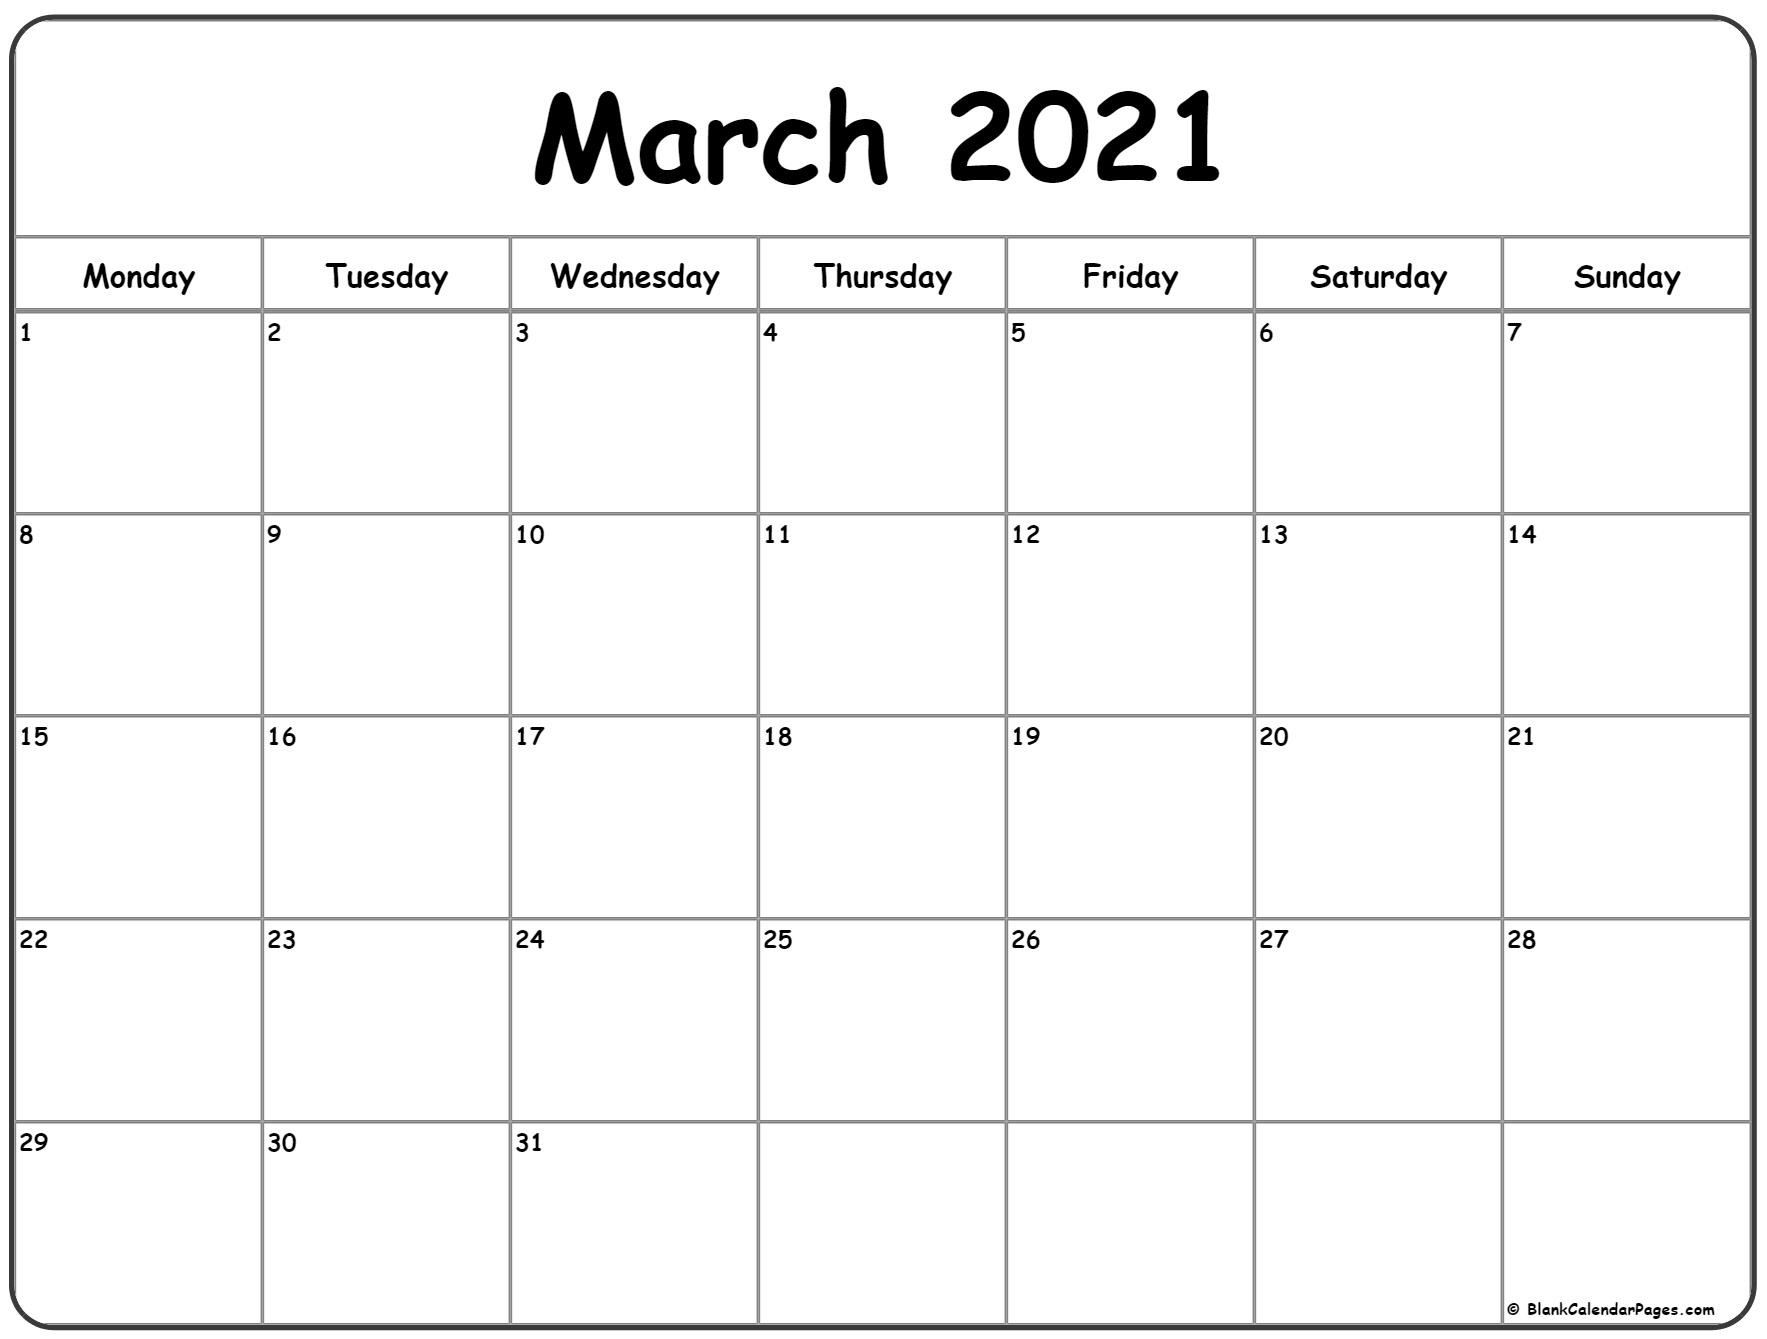 March 2021 Monday Calendar | Monday To Sunday-Blank Calendar Pages March 2021